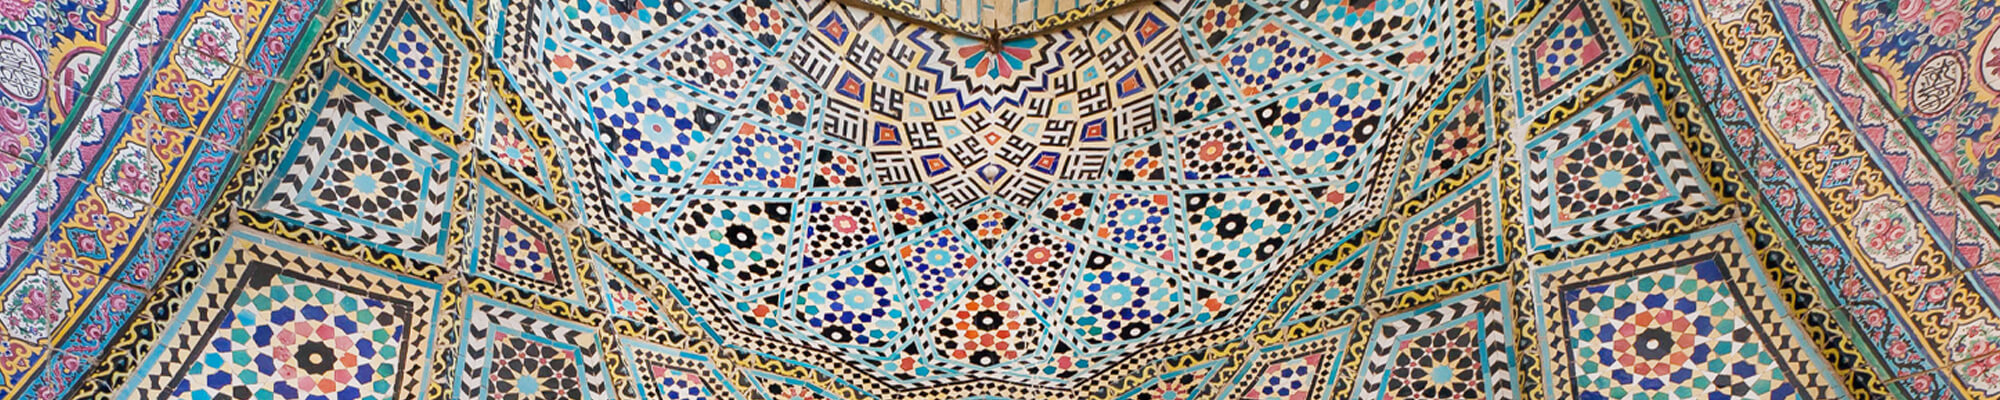 ersian patterns on tiled wall of mosque Nasir ol Molk with traditional artworks, Iran